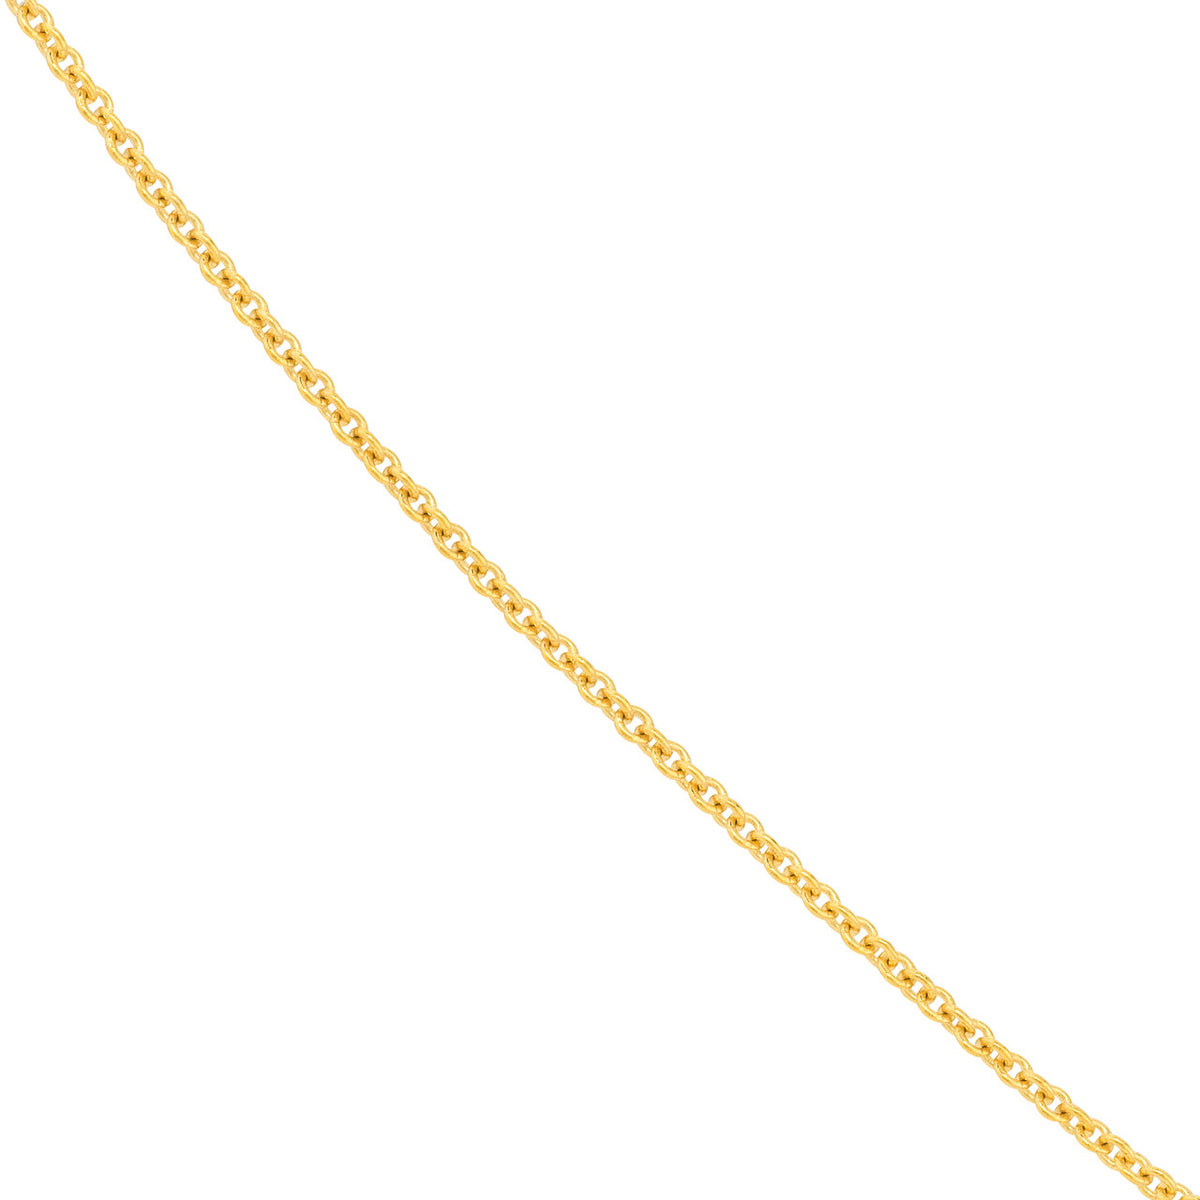 14K Yellow Gold or White Gold 1.2mm Adjustable Child's Cable Chain Necklace